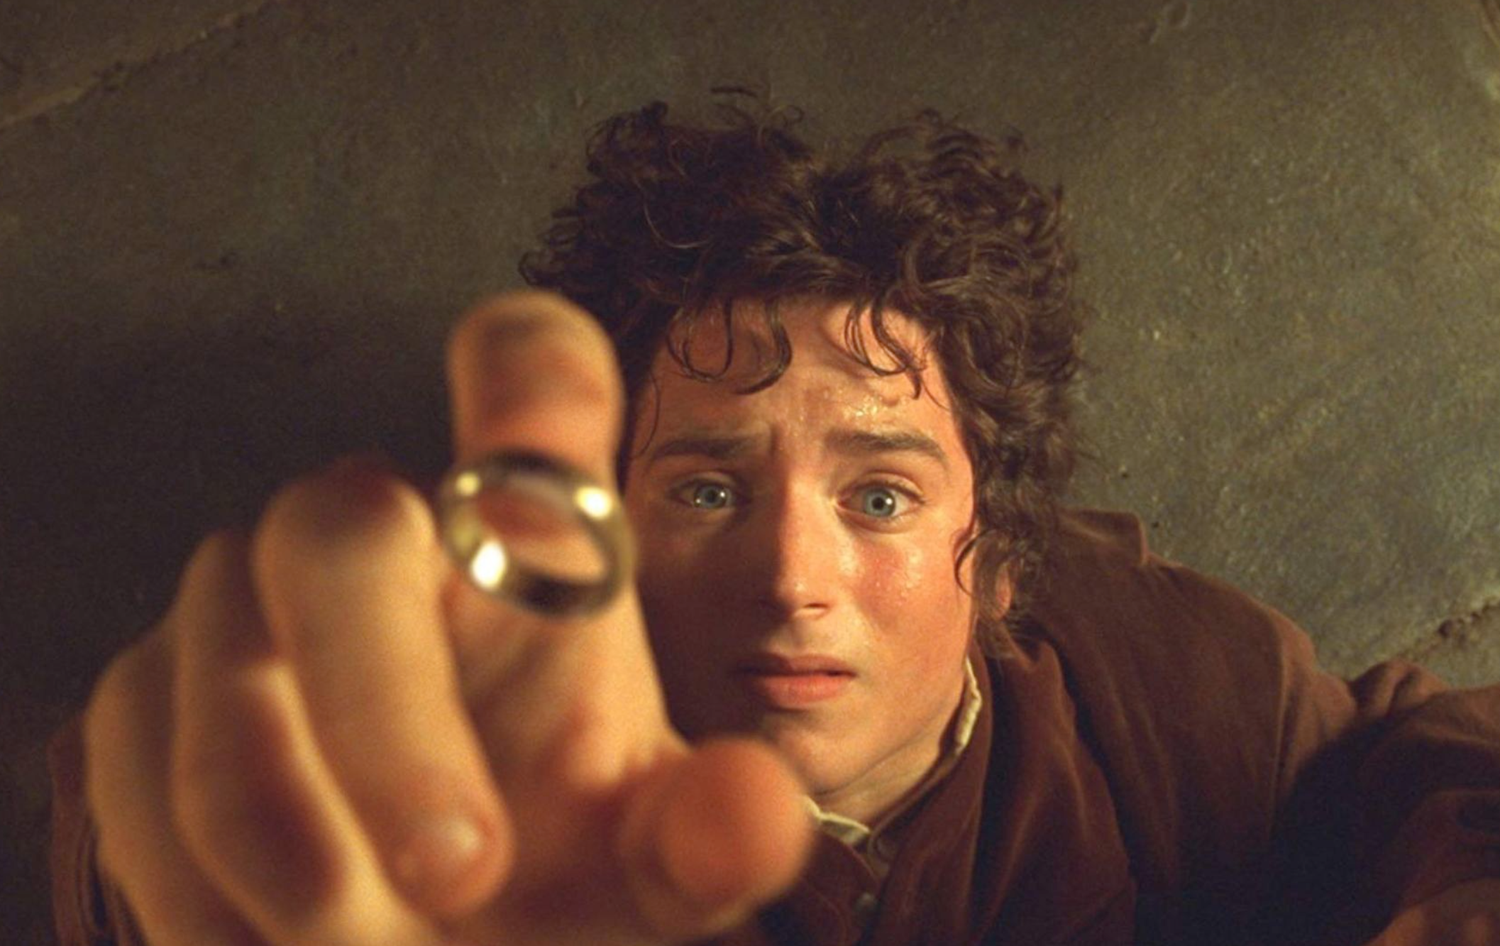 The Lord Of The Ring: The Fellowship Of The Ring